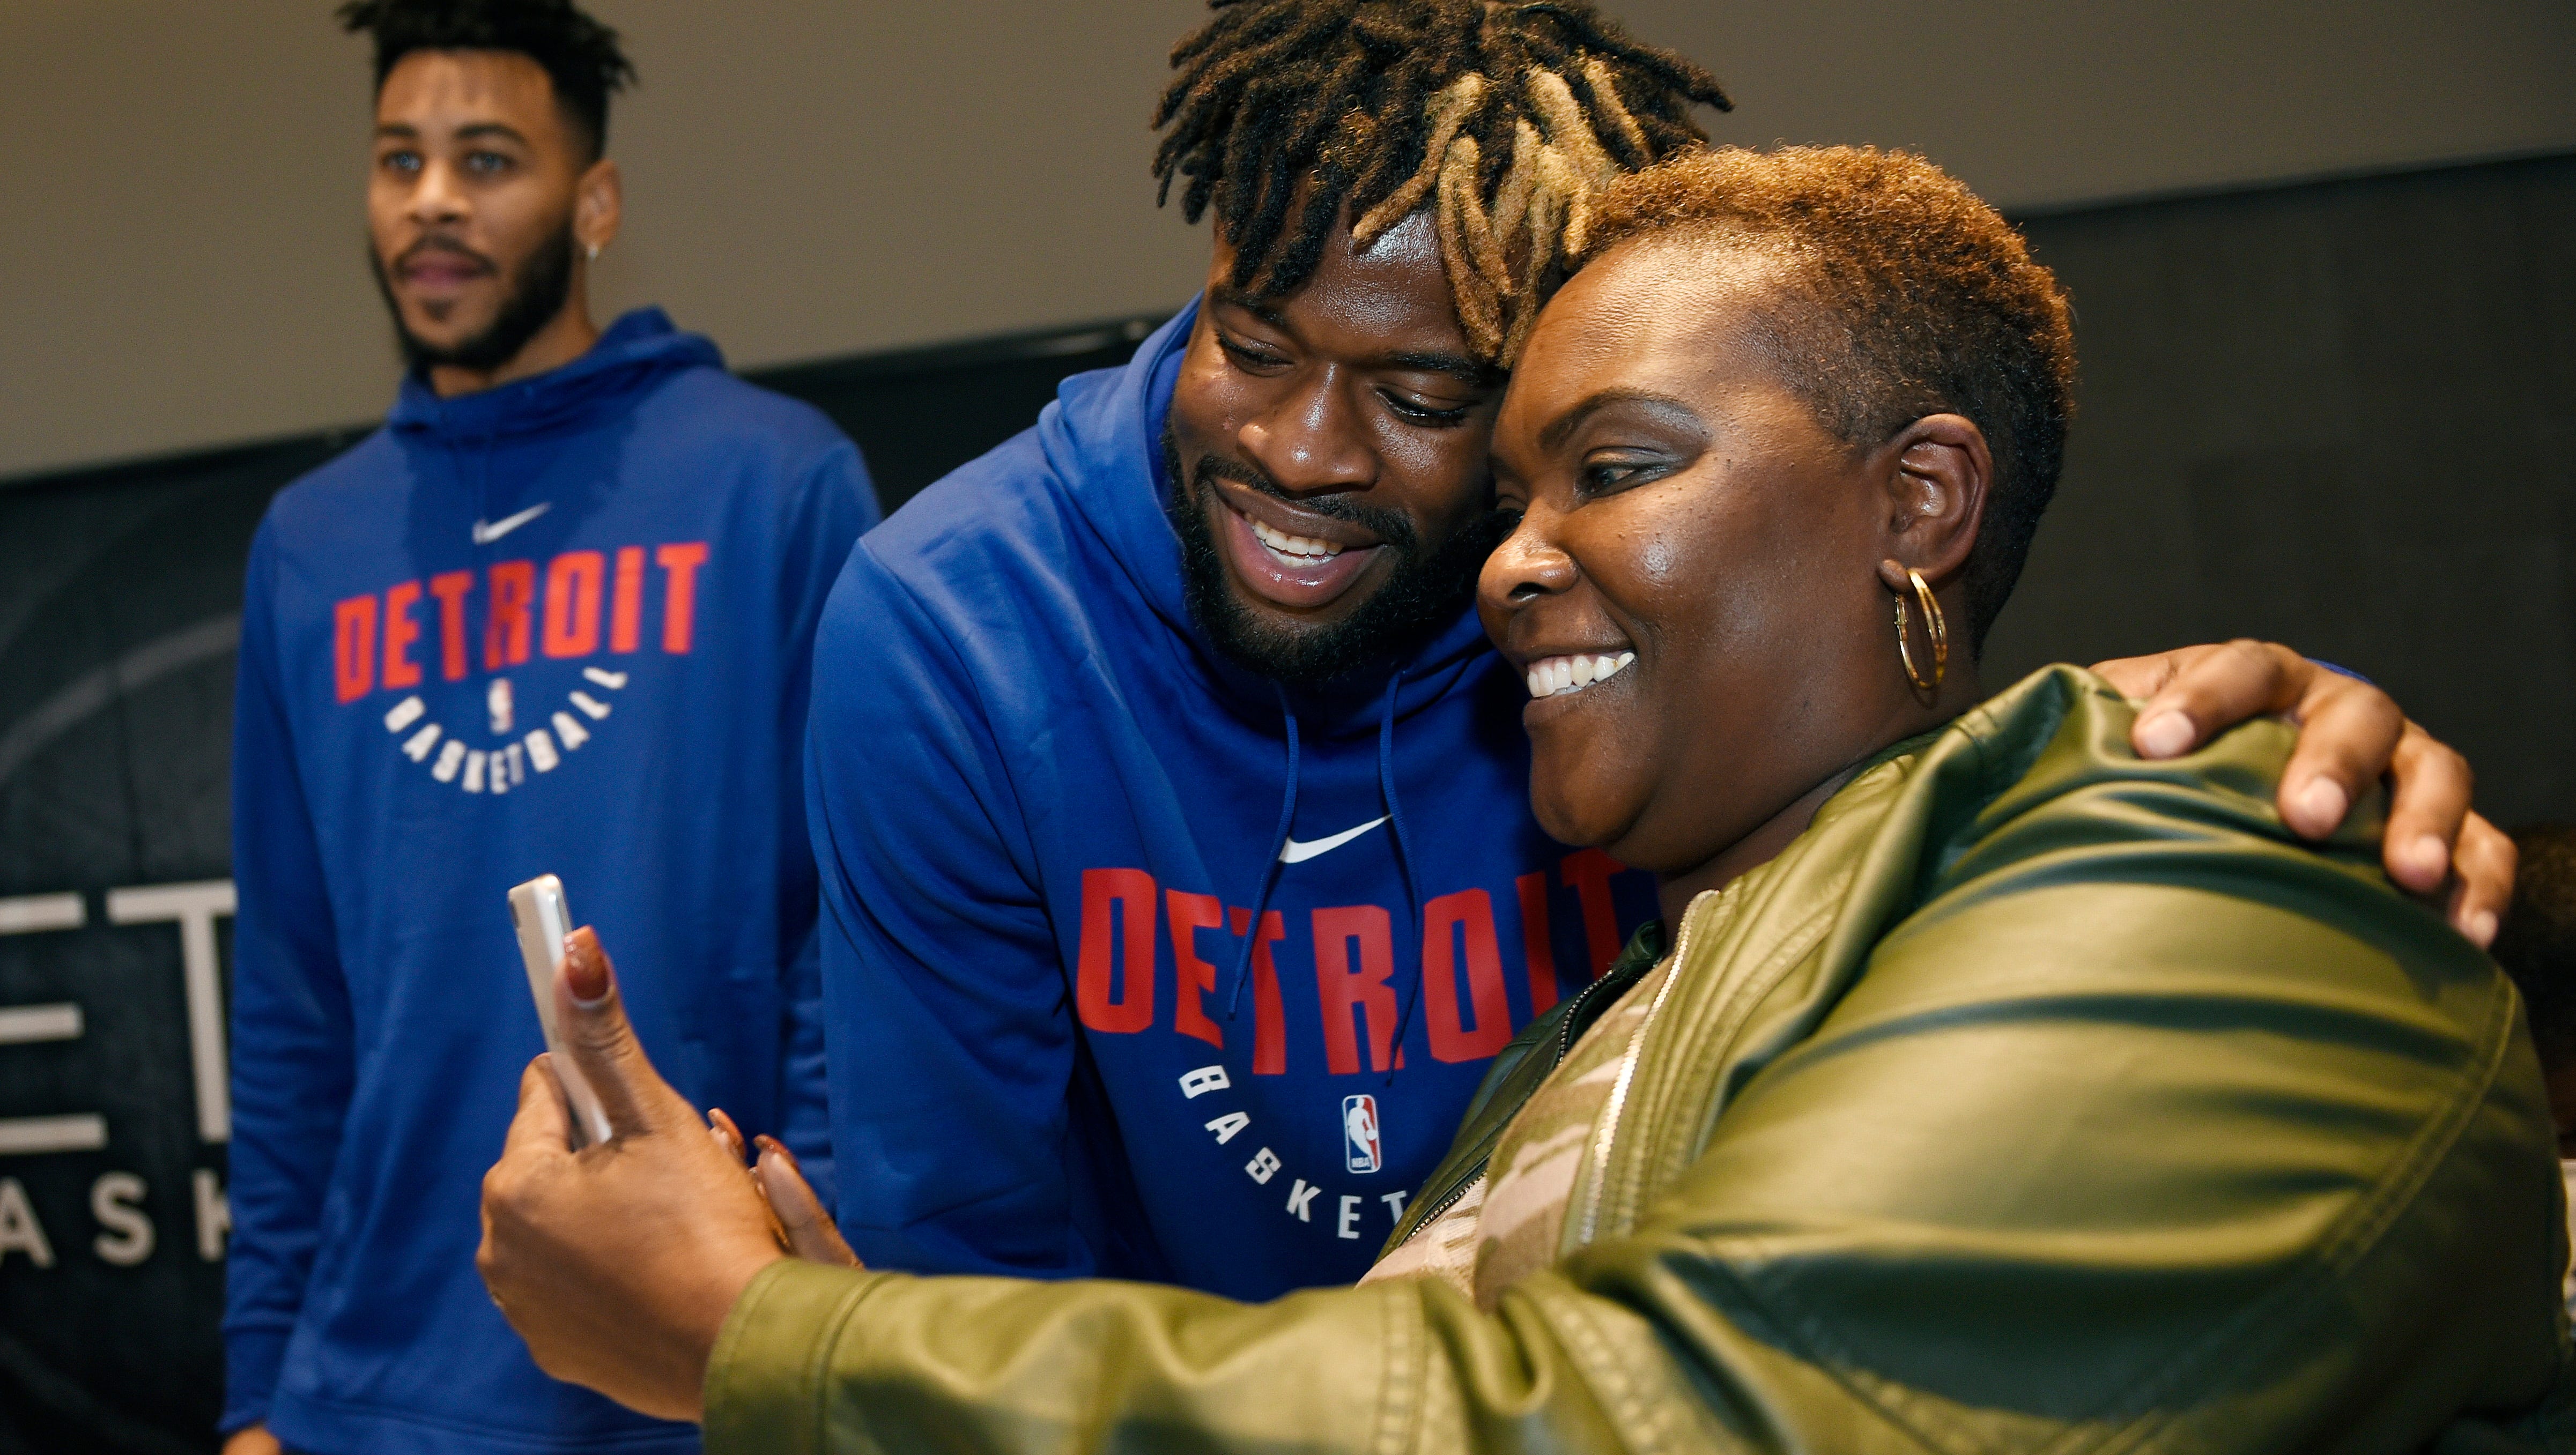 Linda Chupp, 52, of Woodhaven, takes a selfie with Piston Reggie Bullock during the Meet the Team event.